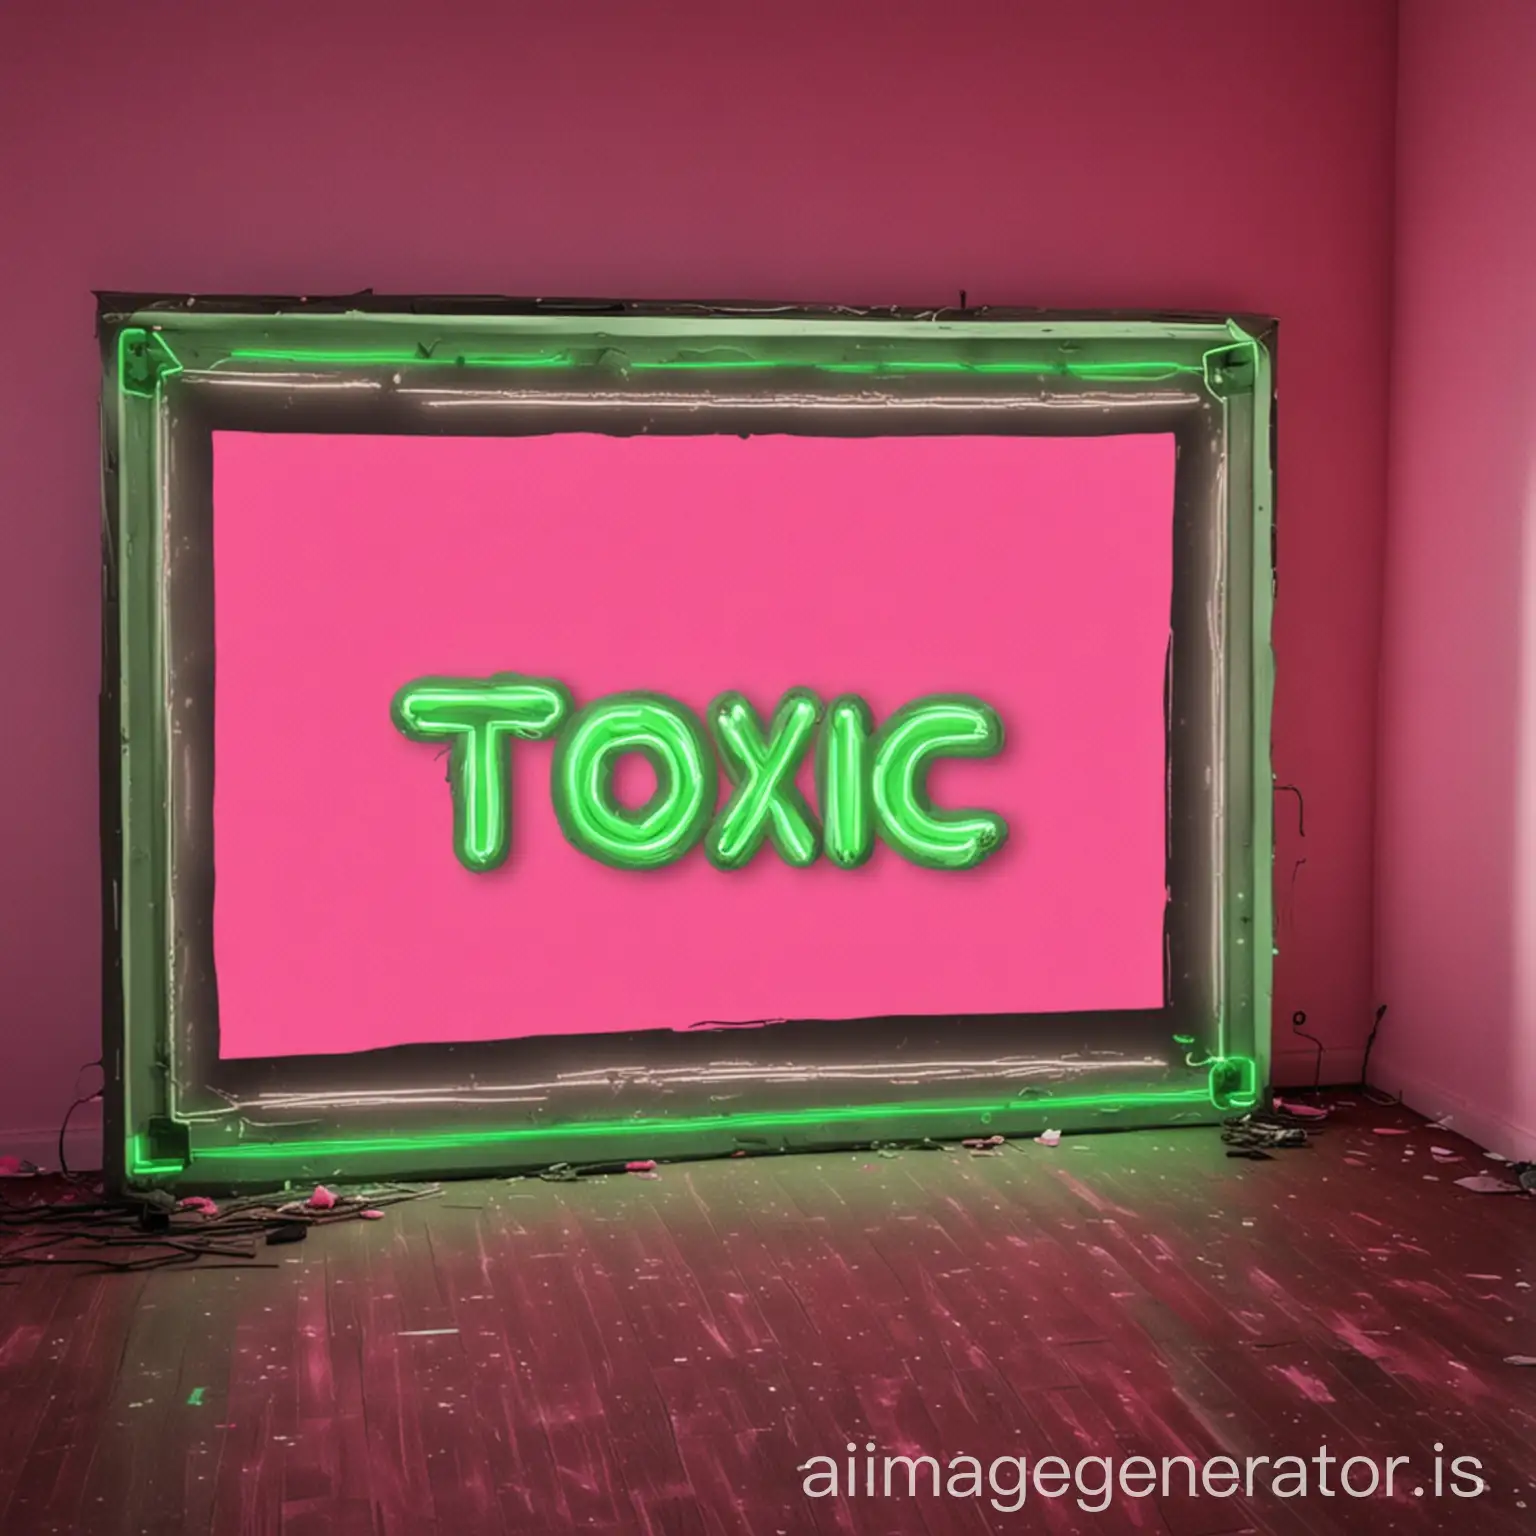 Green screen background for TikTok . With writing in neon green and pink saying TOXIC AIRES ROOM